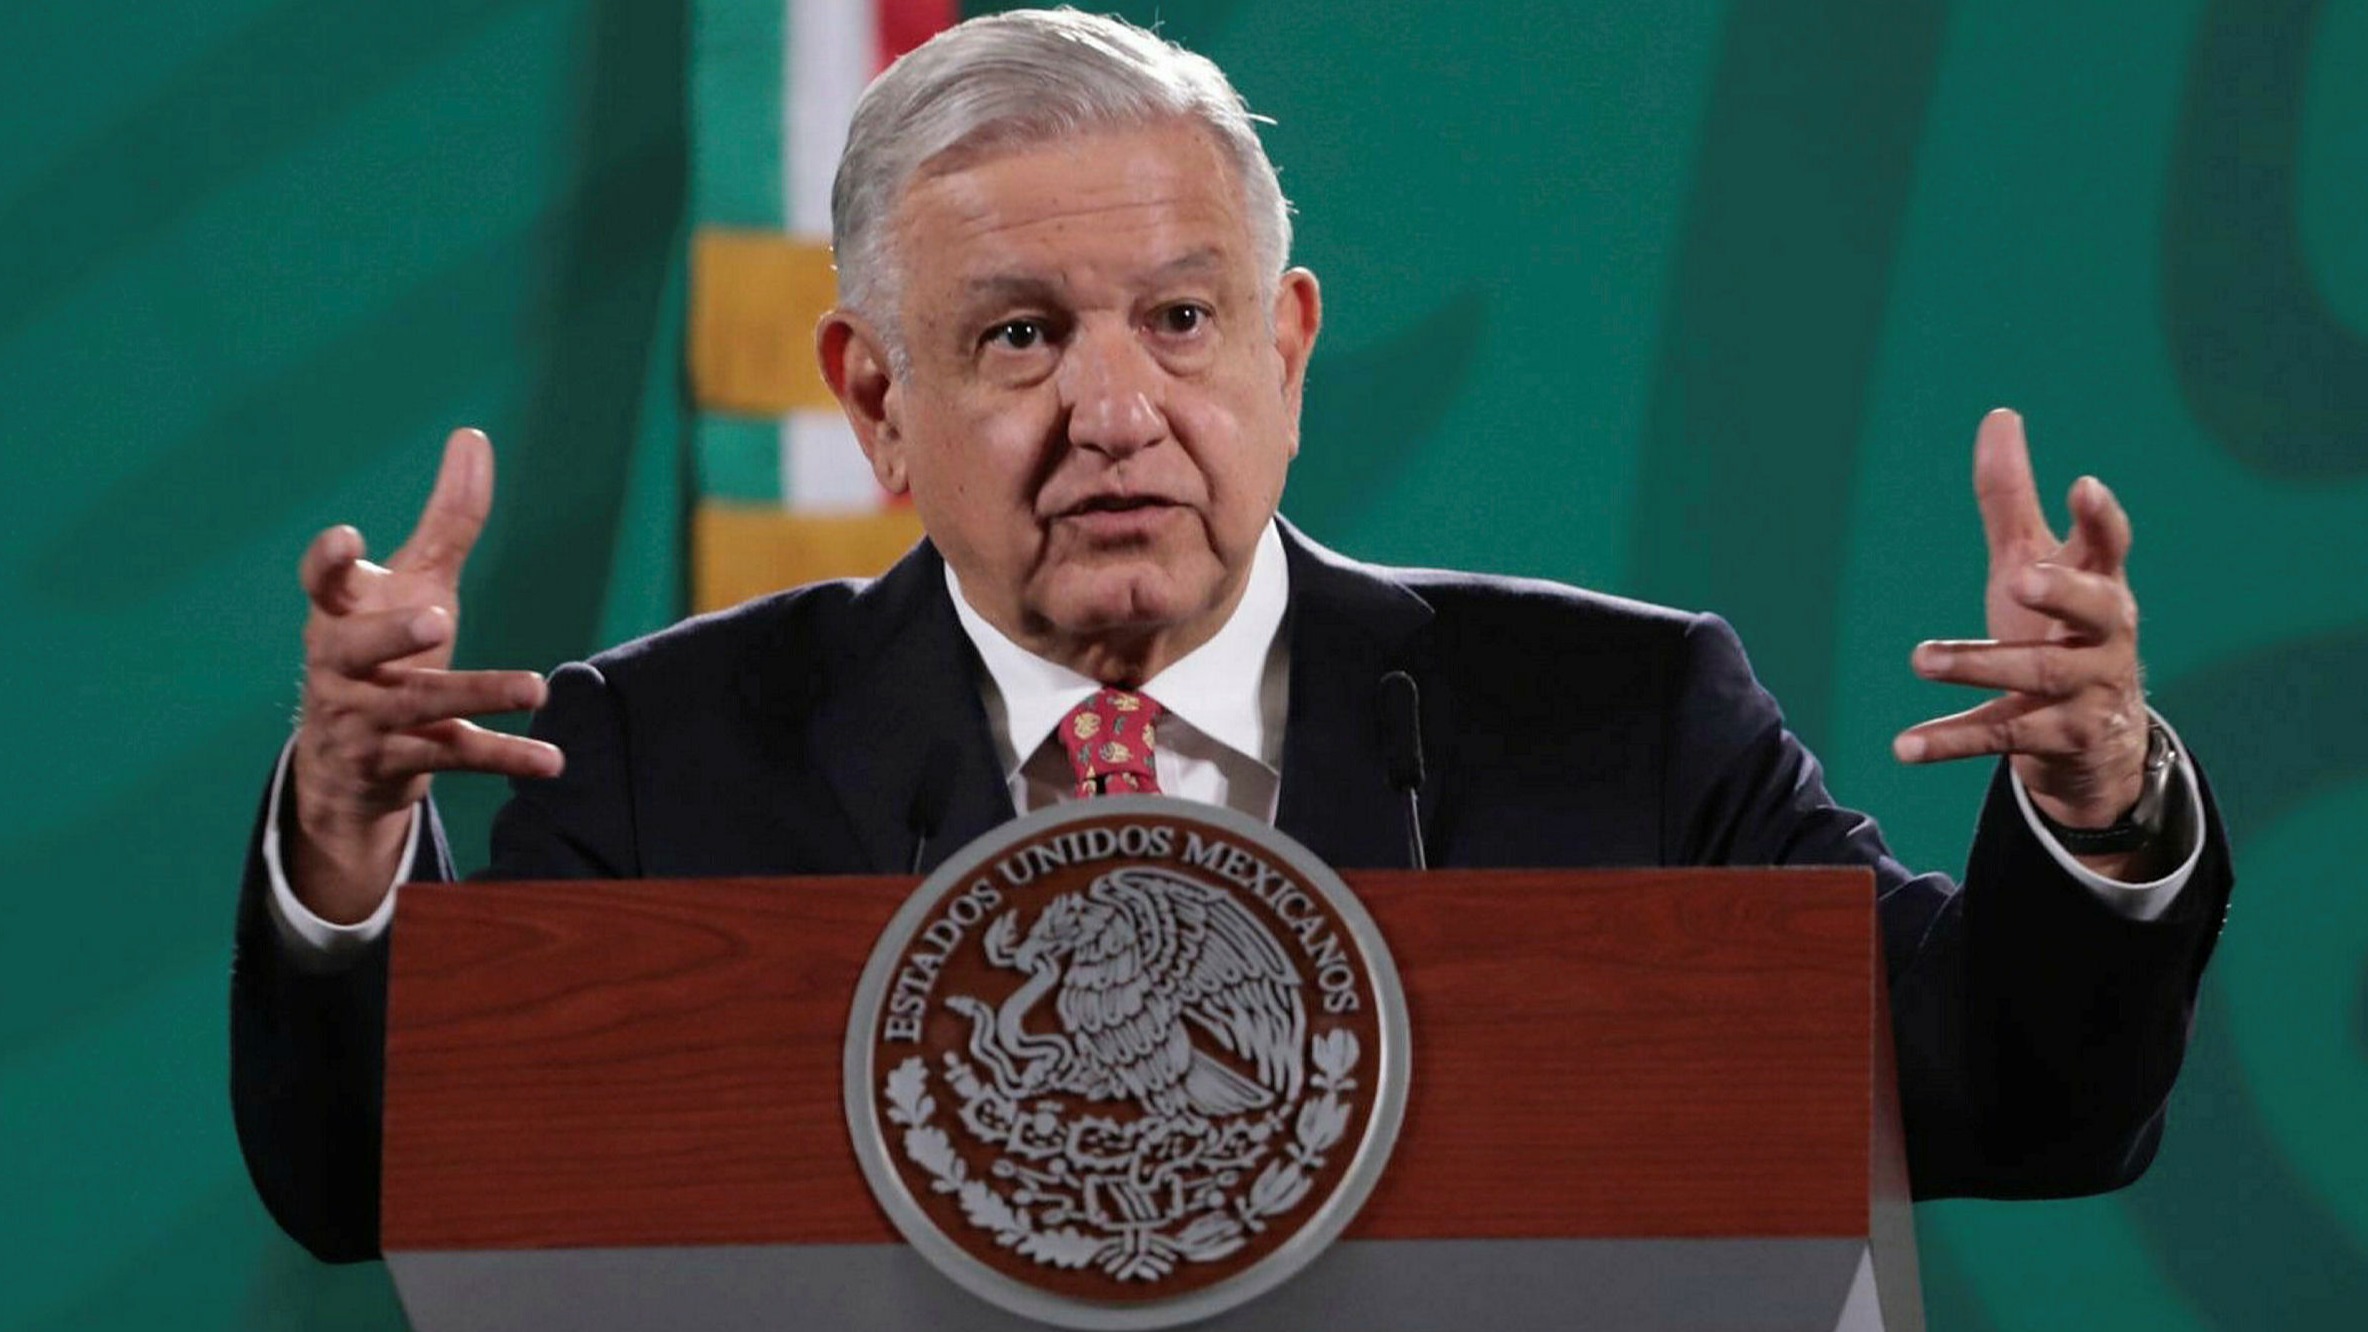 Amlo's media naming and shaming shows a flexible approach to facts | Financial Times